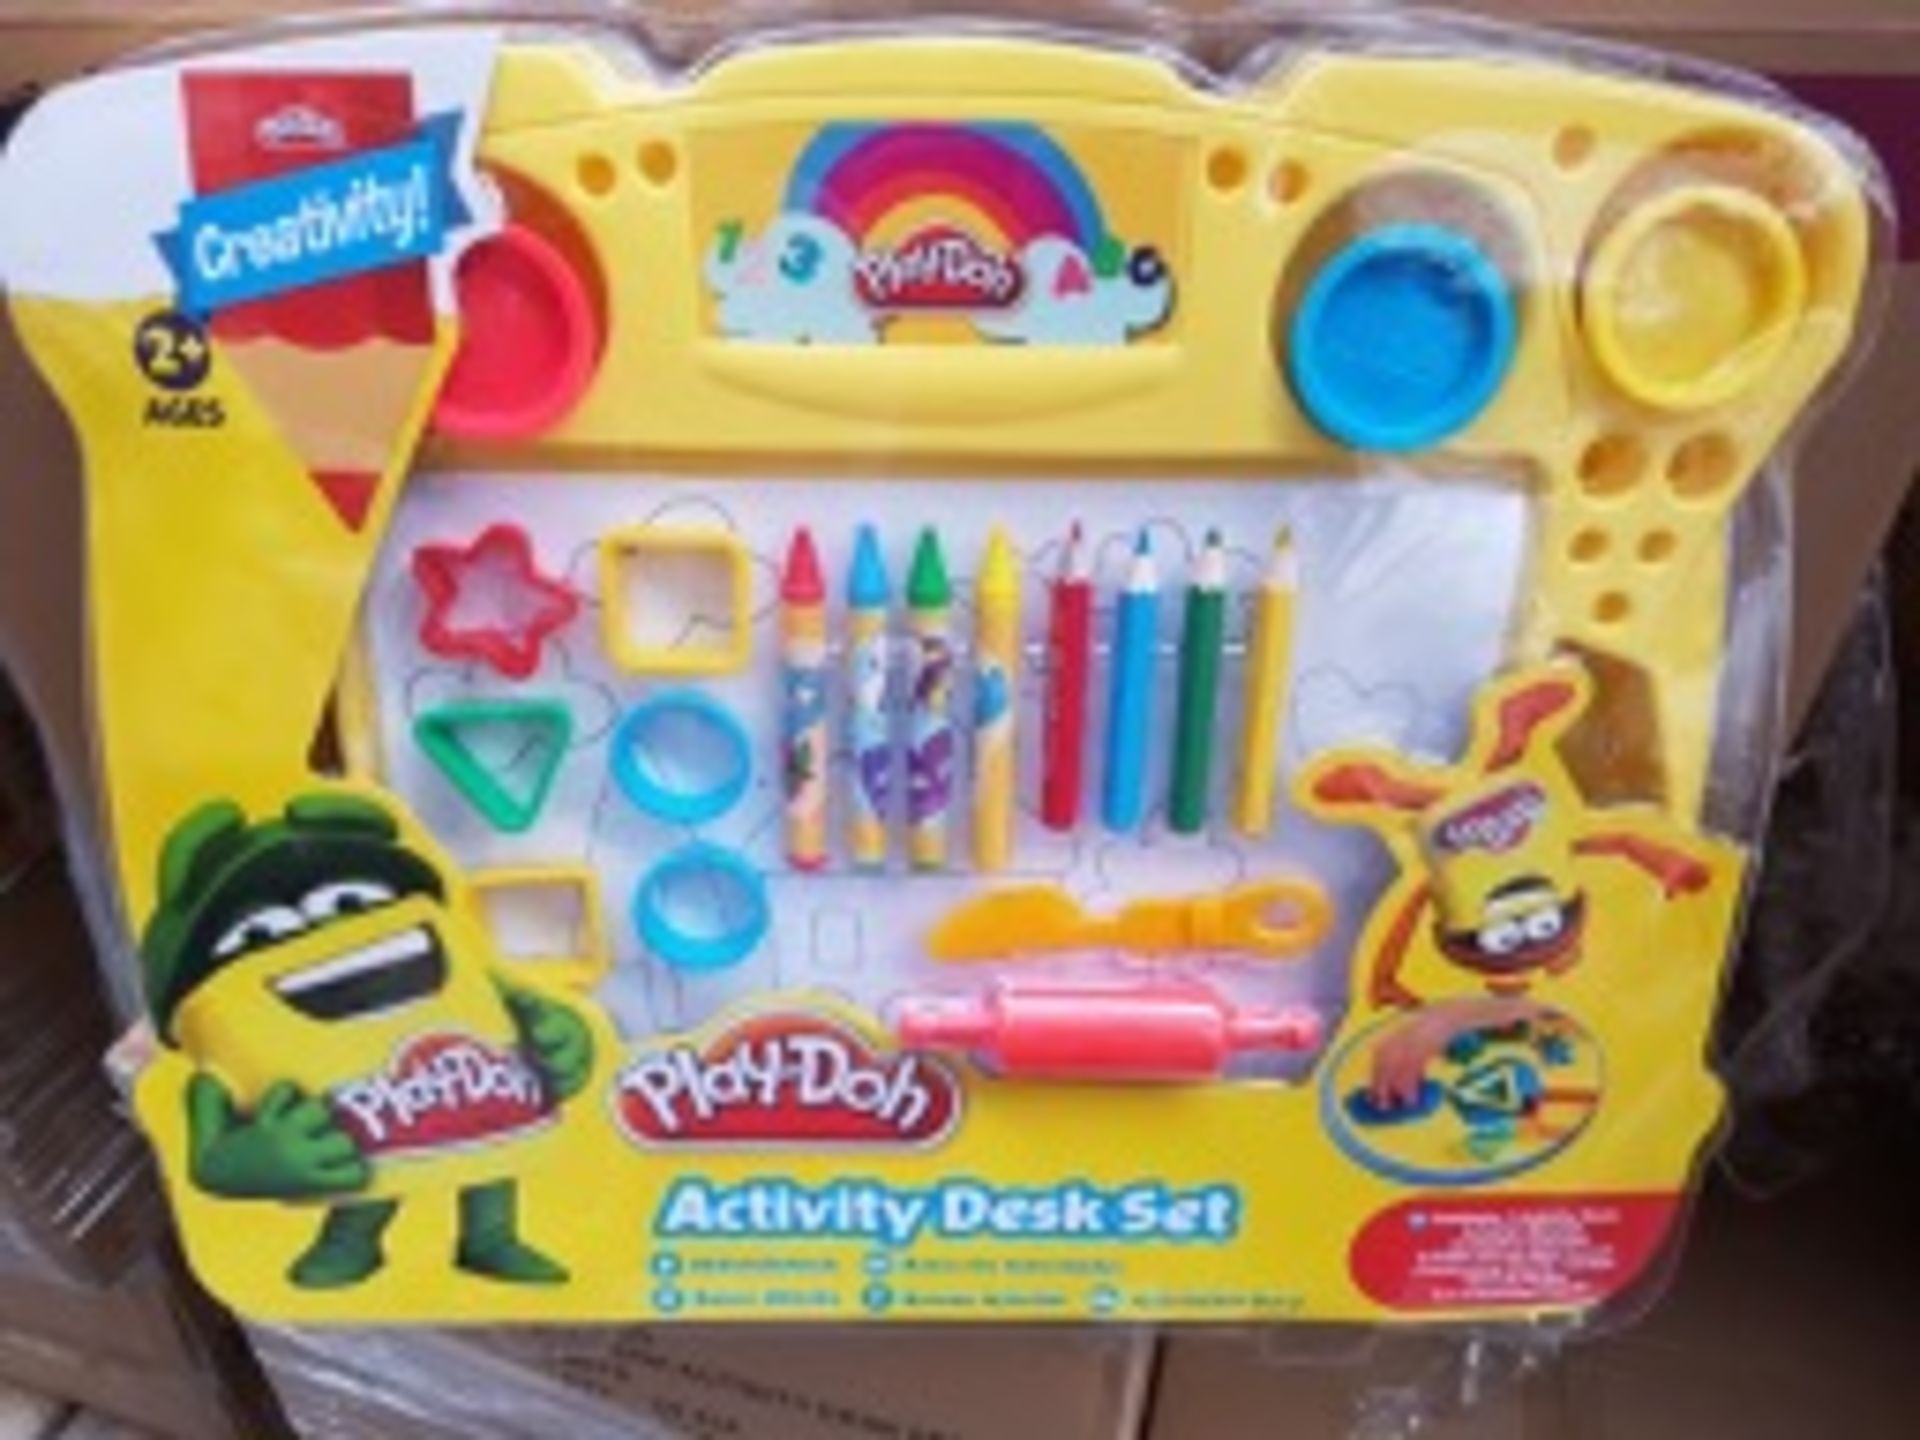 PALLET TO CONTAIN 60 x Brand New Play-Doh Activity Desk Set. Each Contains 1 activity desk, 6 cutter